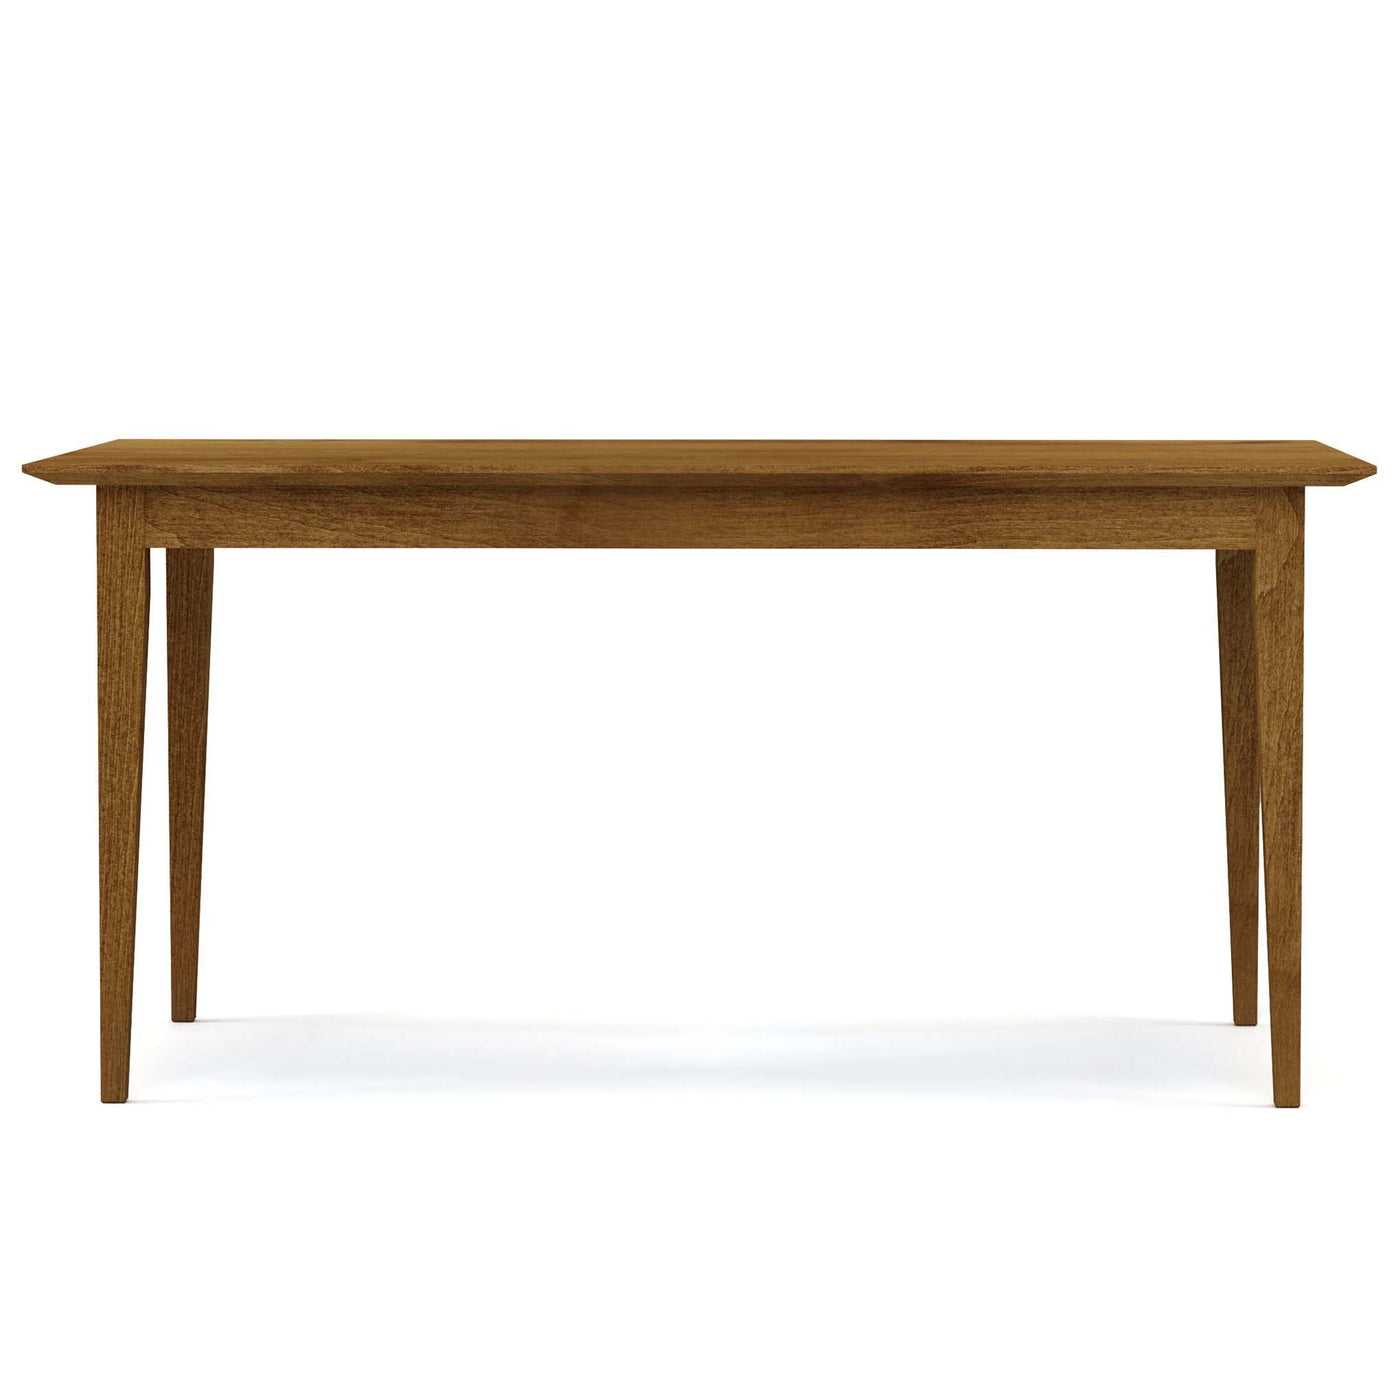 Stickley Gable Road 62 Inch Dining Table